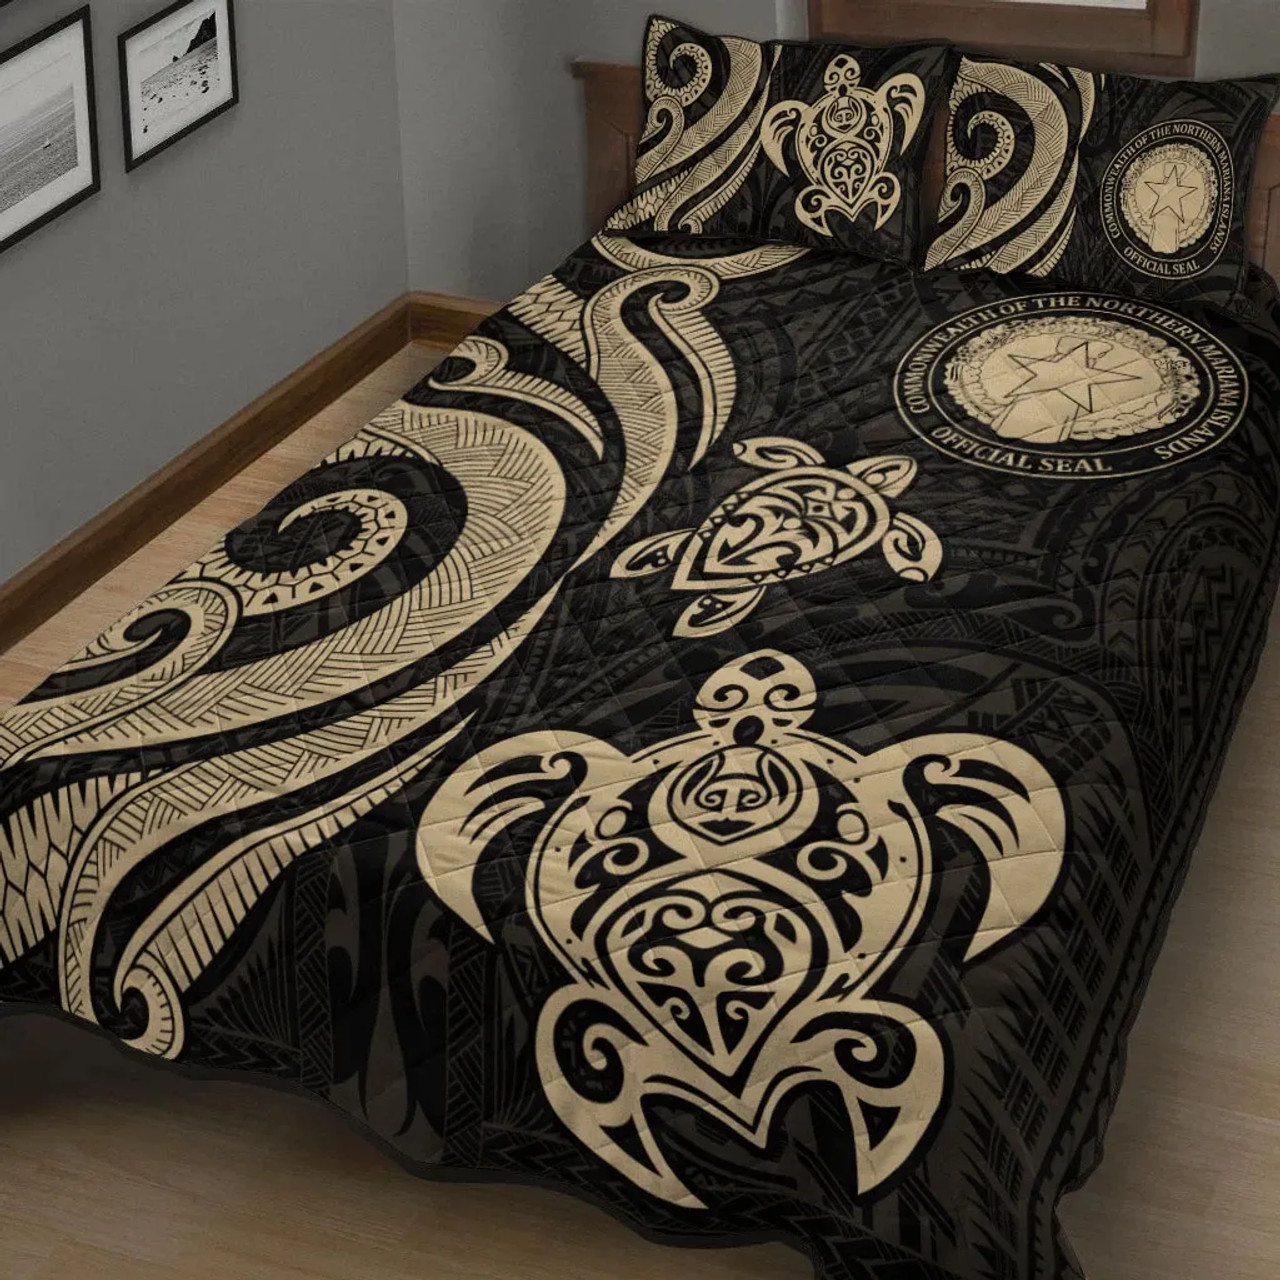 Northern Mariana Islands Quilt Bed Set - Gold Tentacle Turtle 3